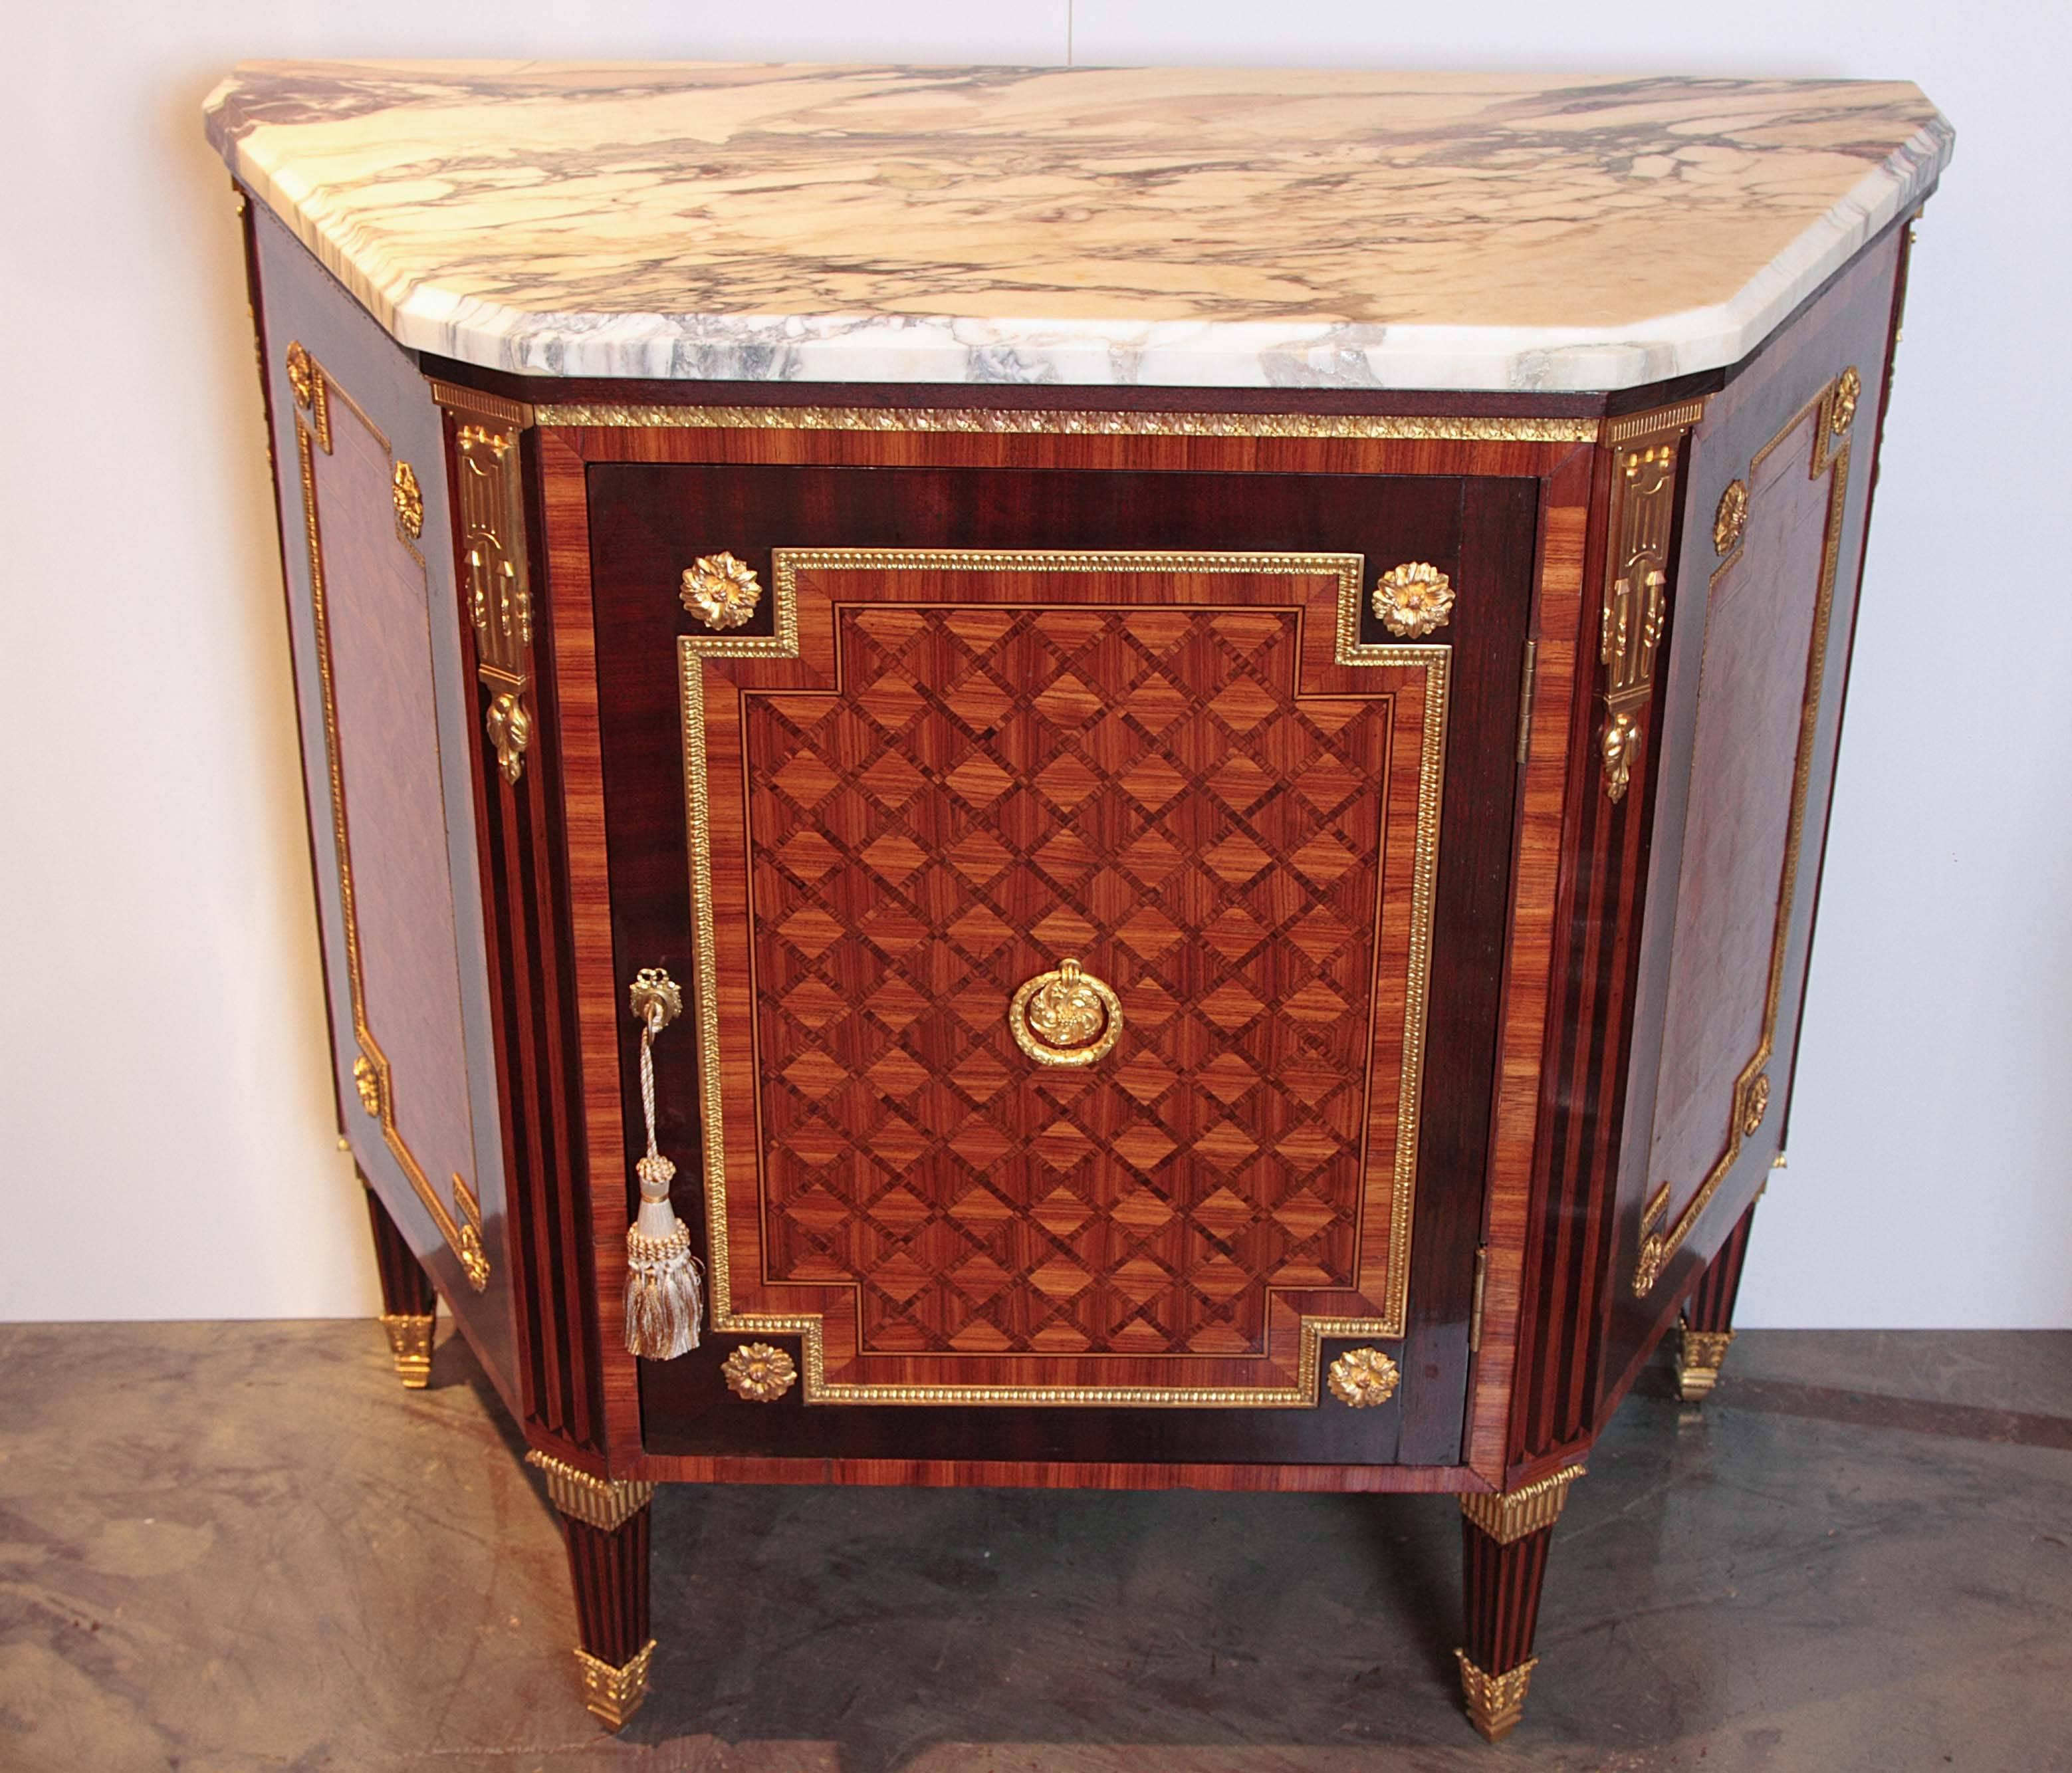 19th century French Louis XVI marble-top commode, signed Sormani.